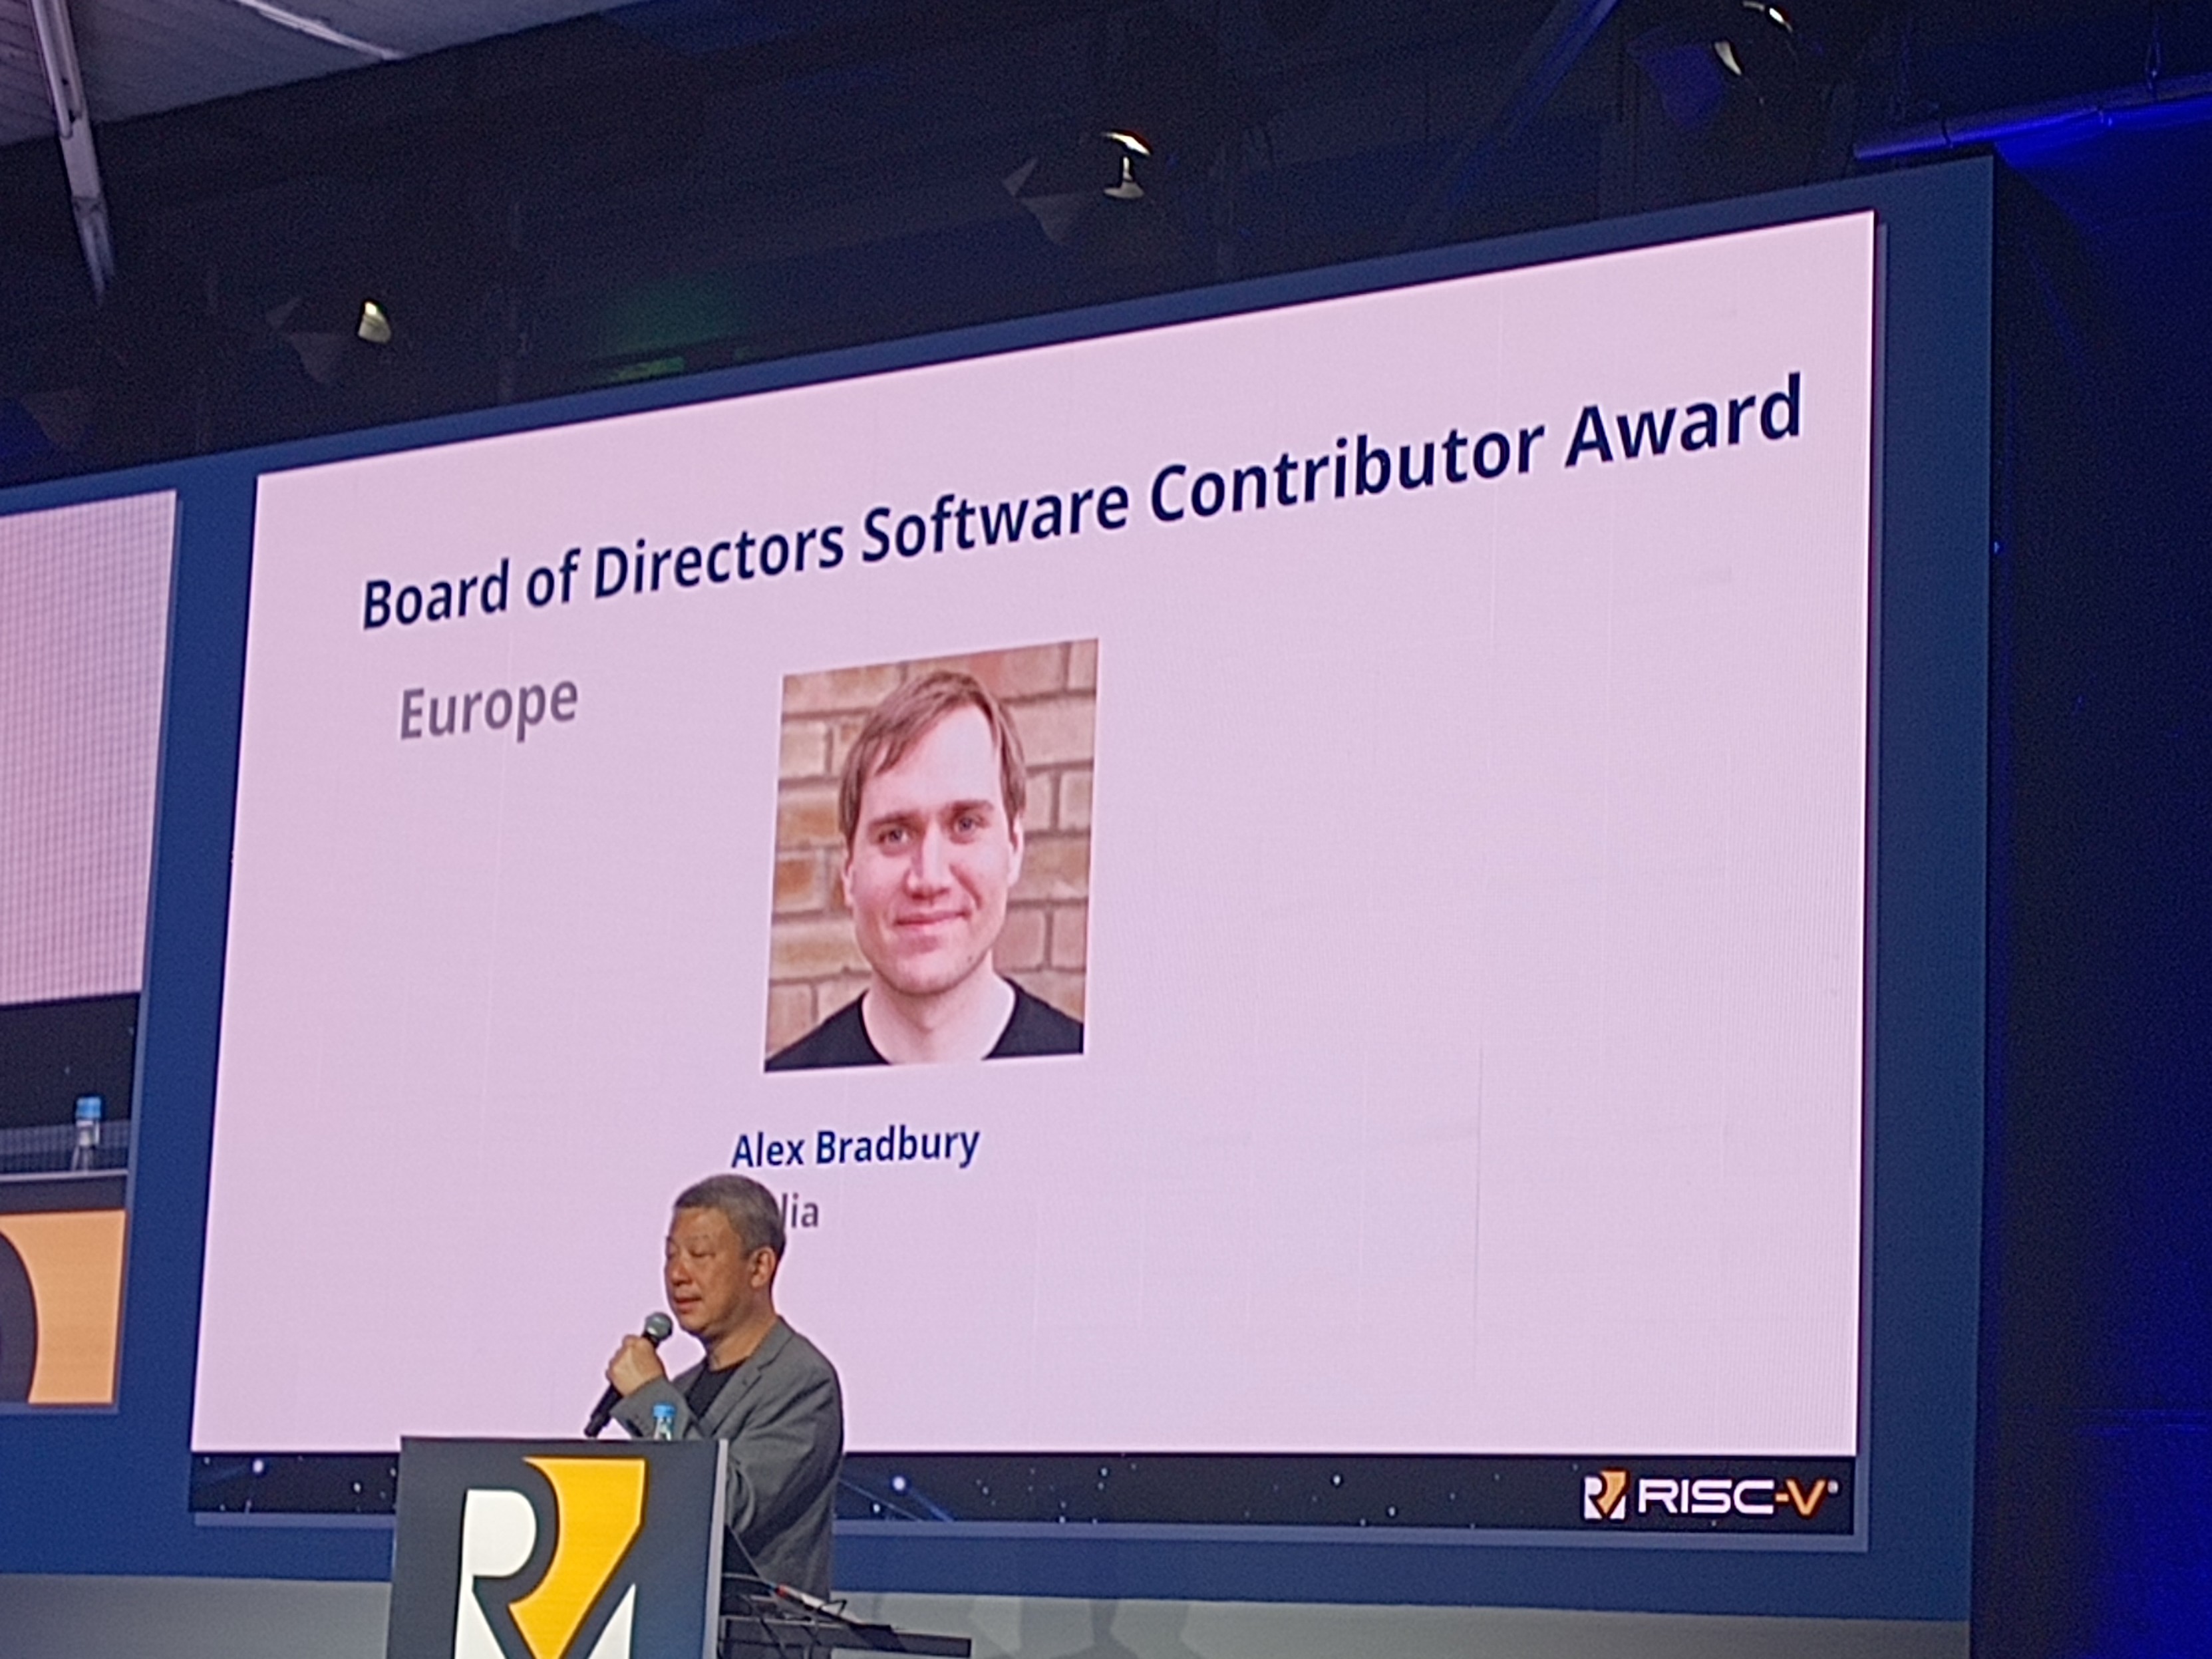 A photo of the presentation in which the award was announced